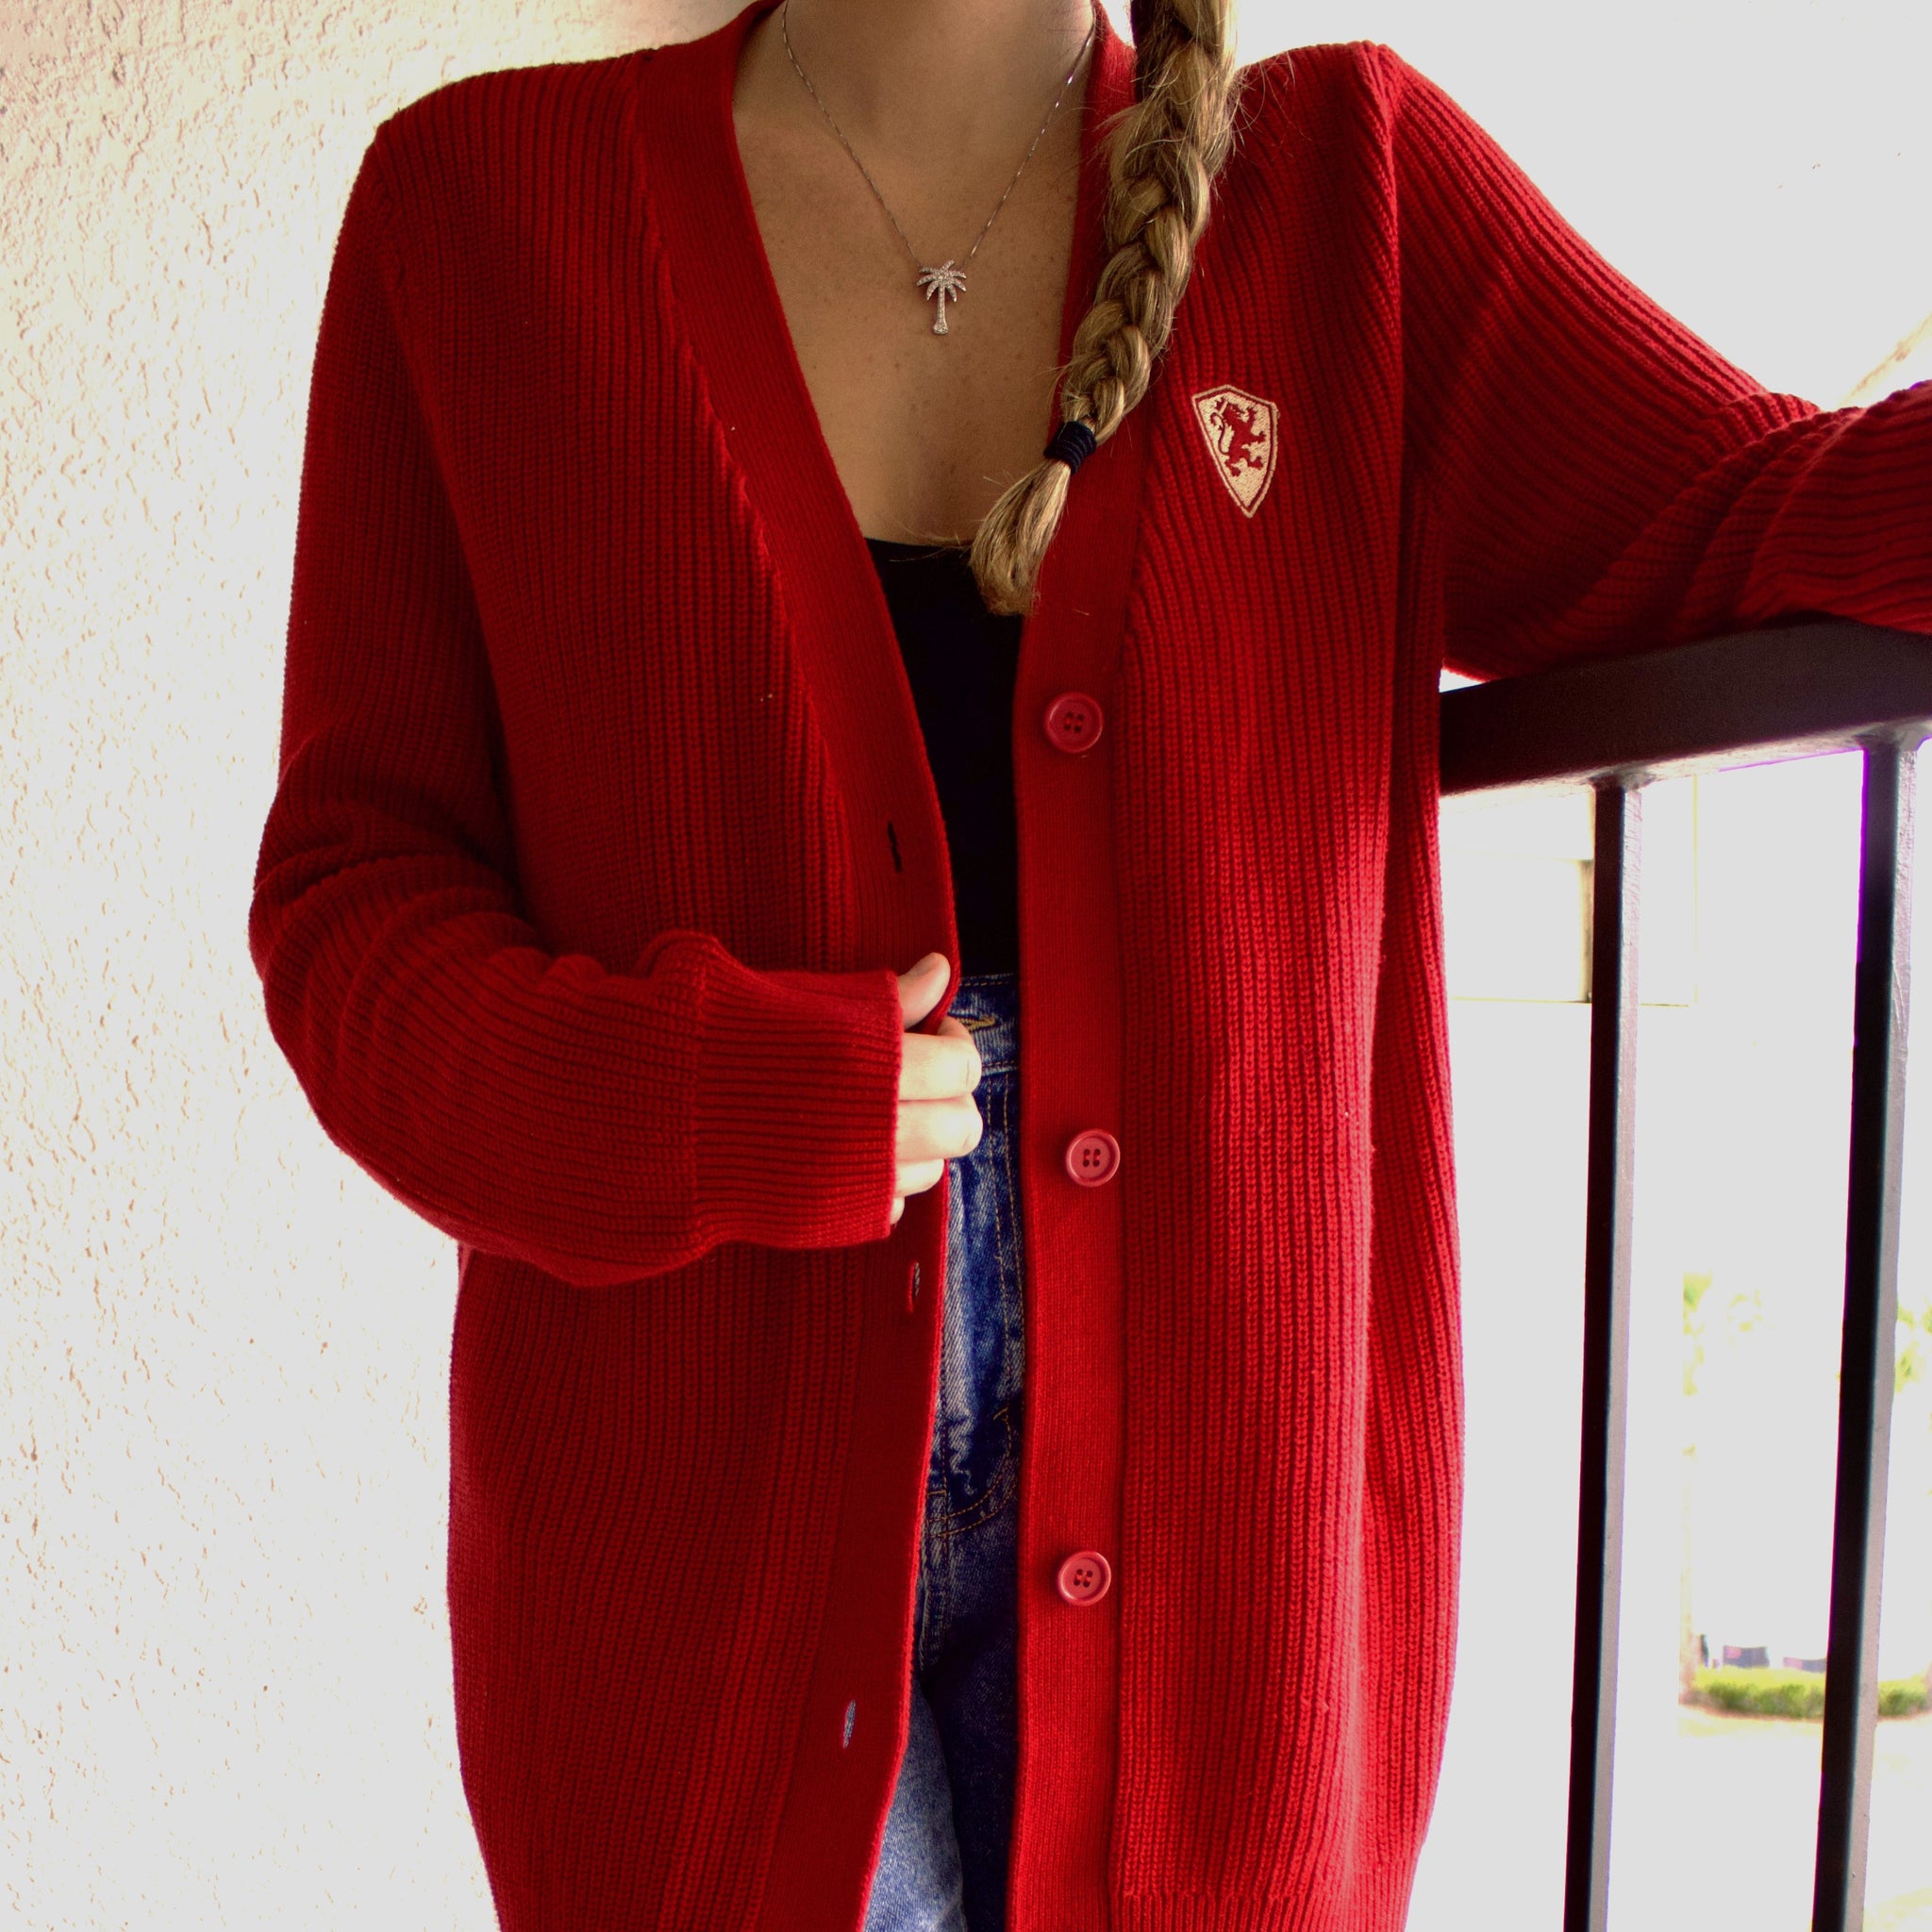 Red button up cardigan with golden Flagler College shield logo on left